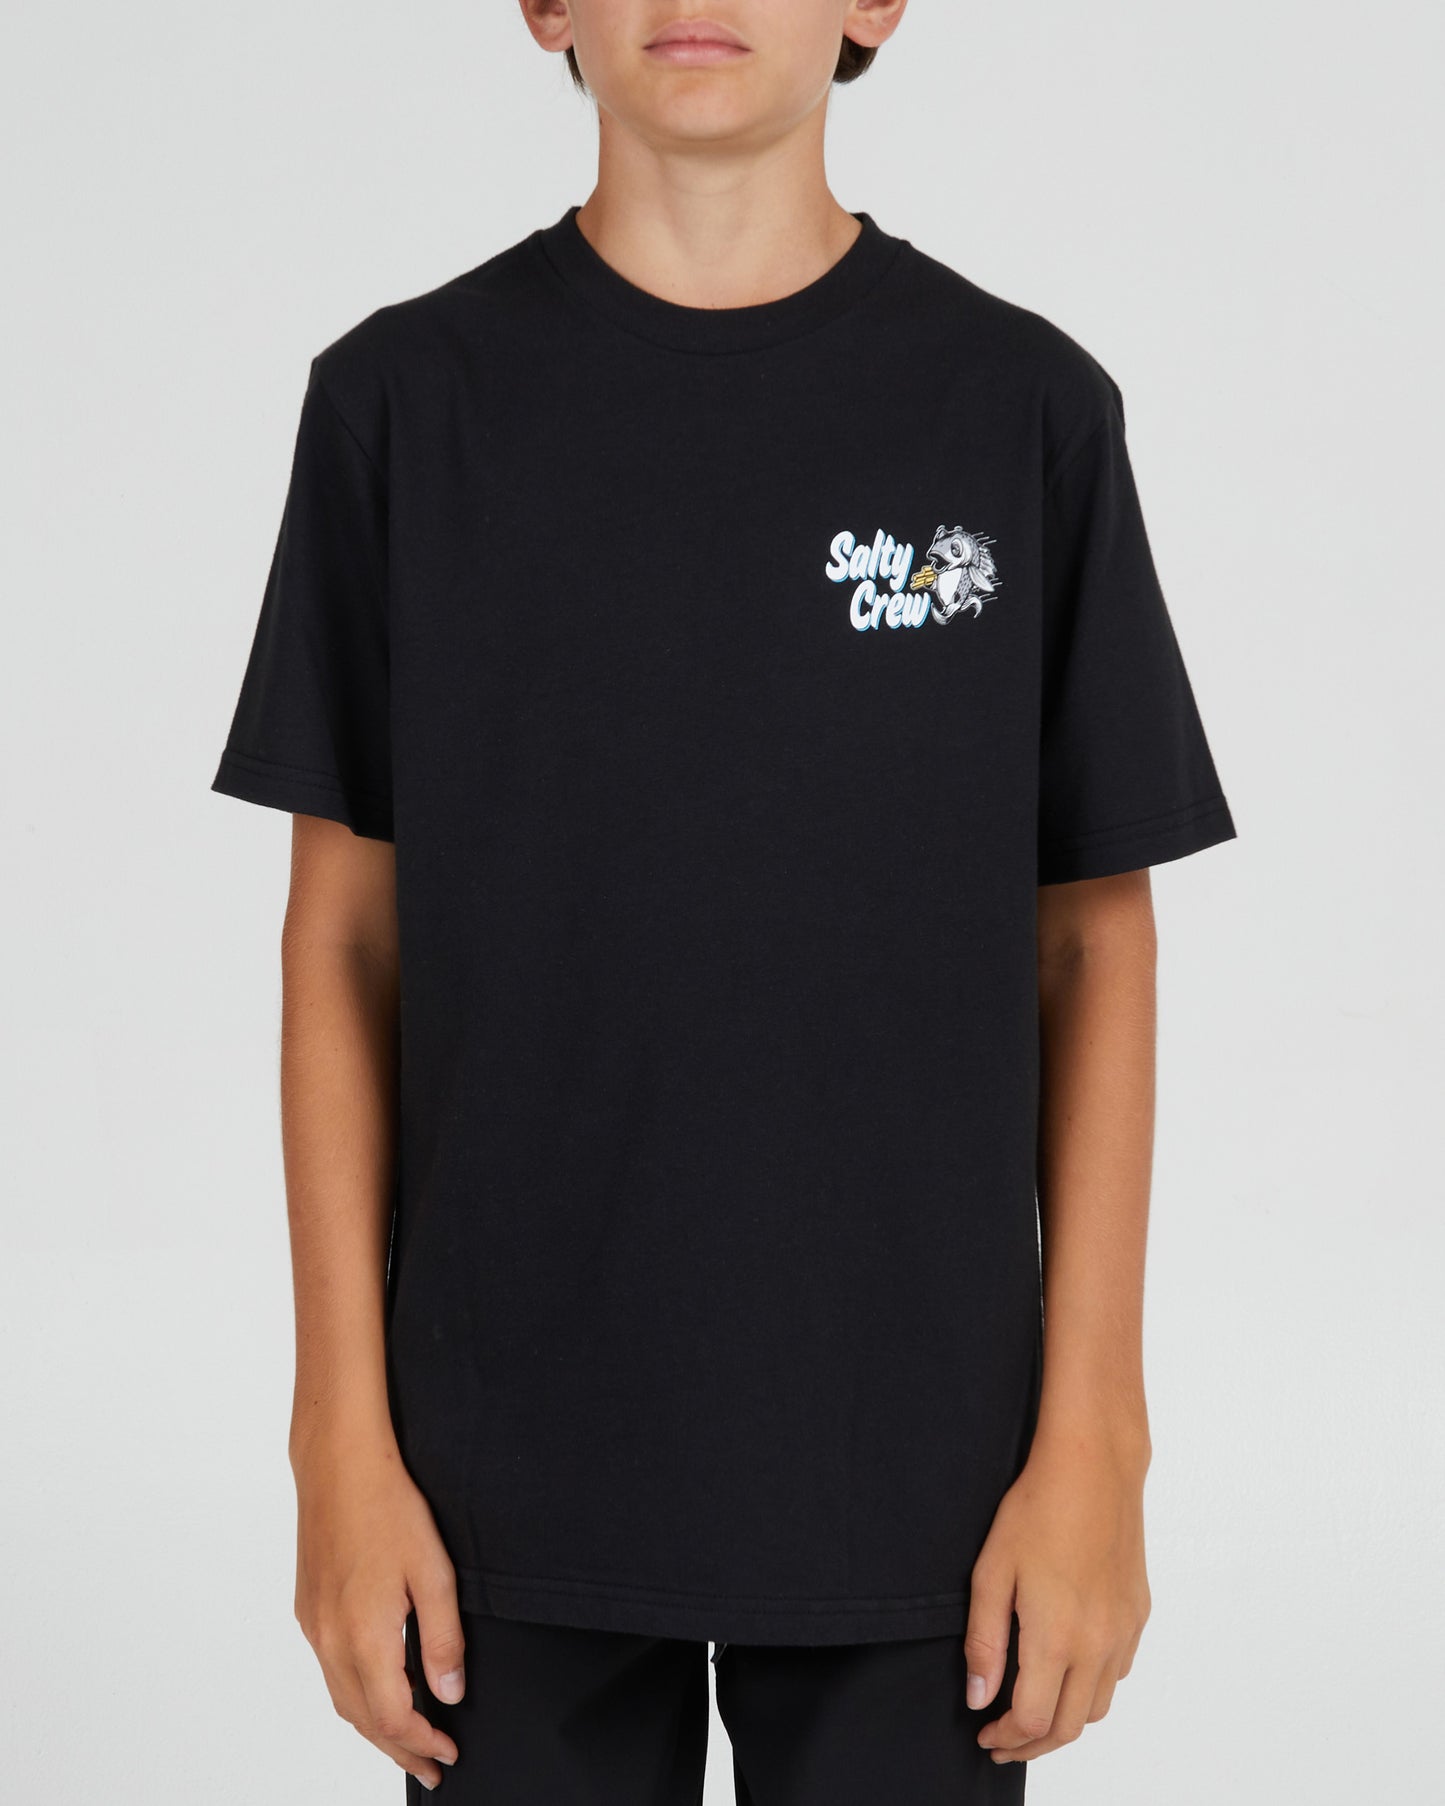 On body front of the Fish And Chips Boys Black S/S Tee